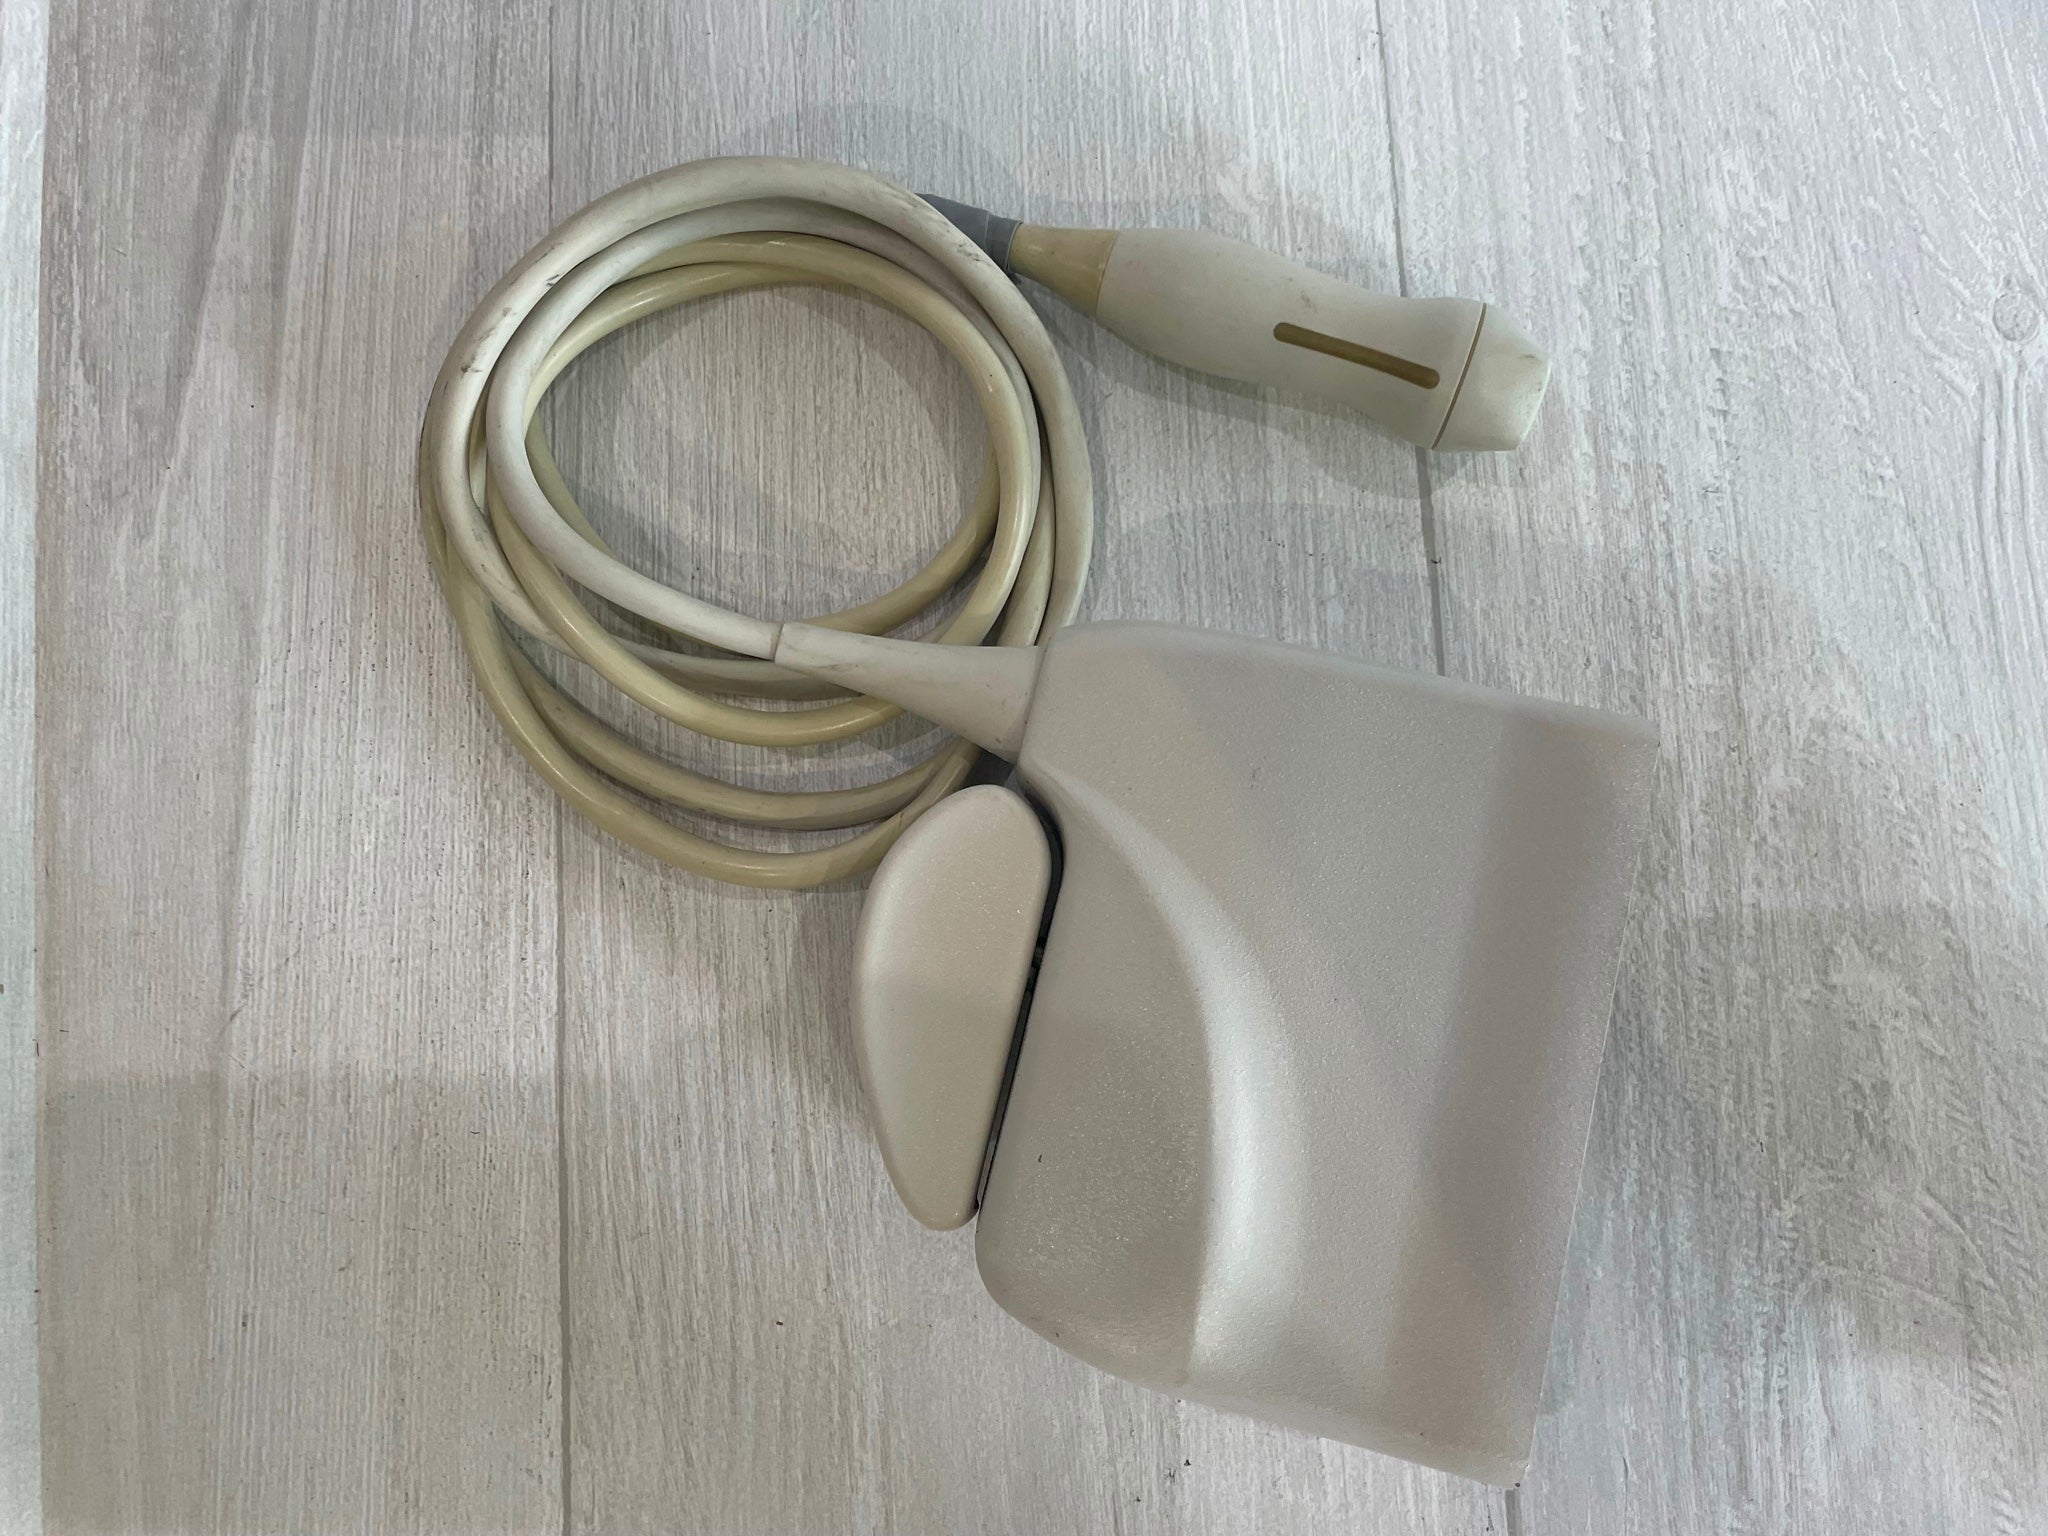 Philips S5-1 Ultrasound Probe Transducer DIAGNOSTIC ULTRASOUND MACHINES FOR SALE